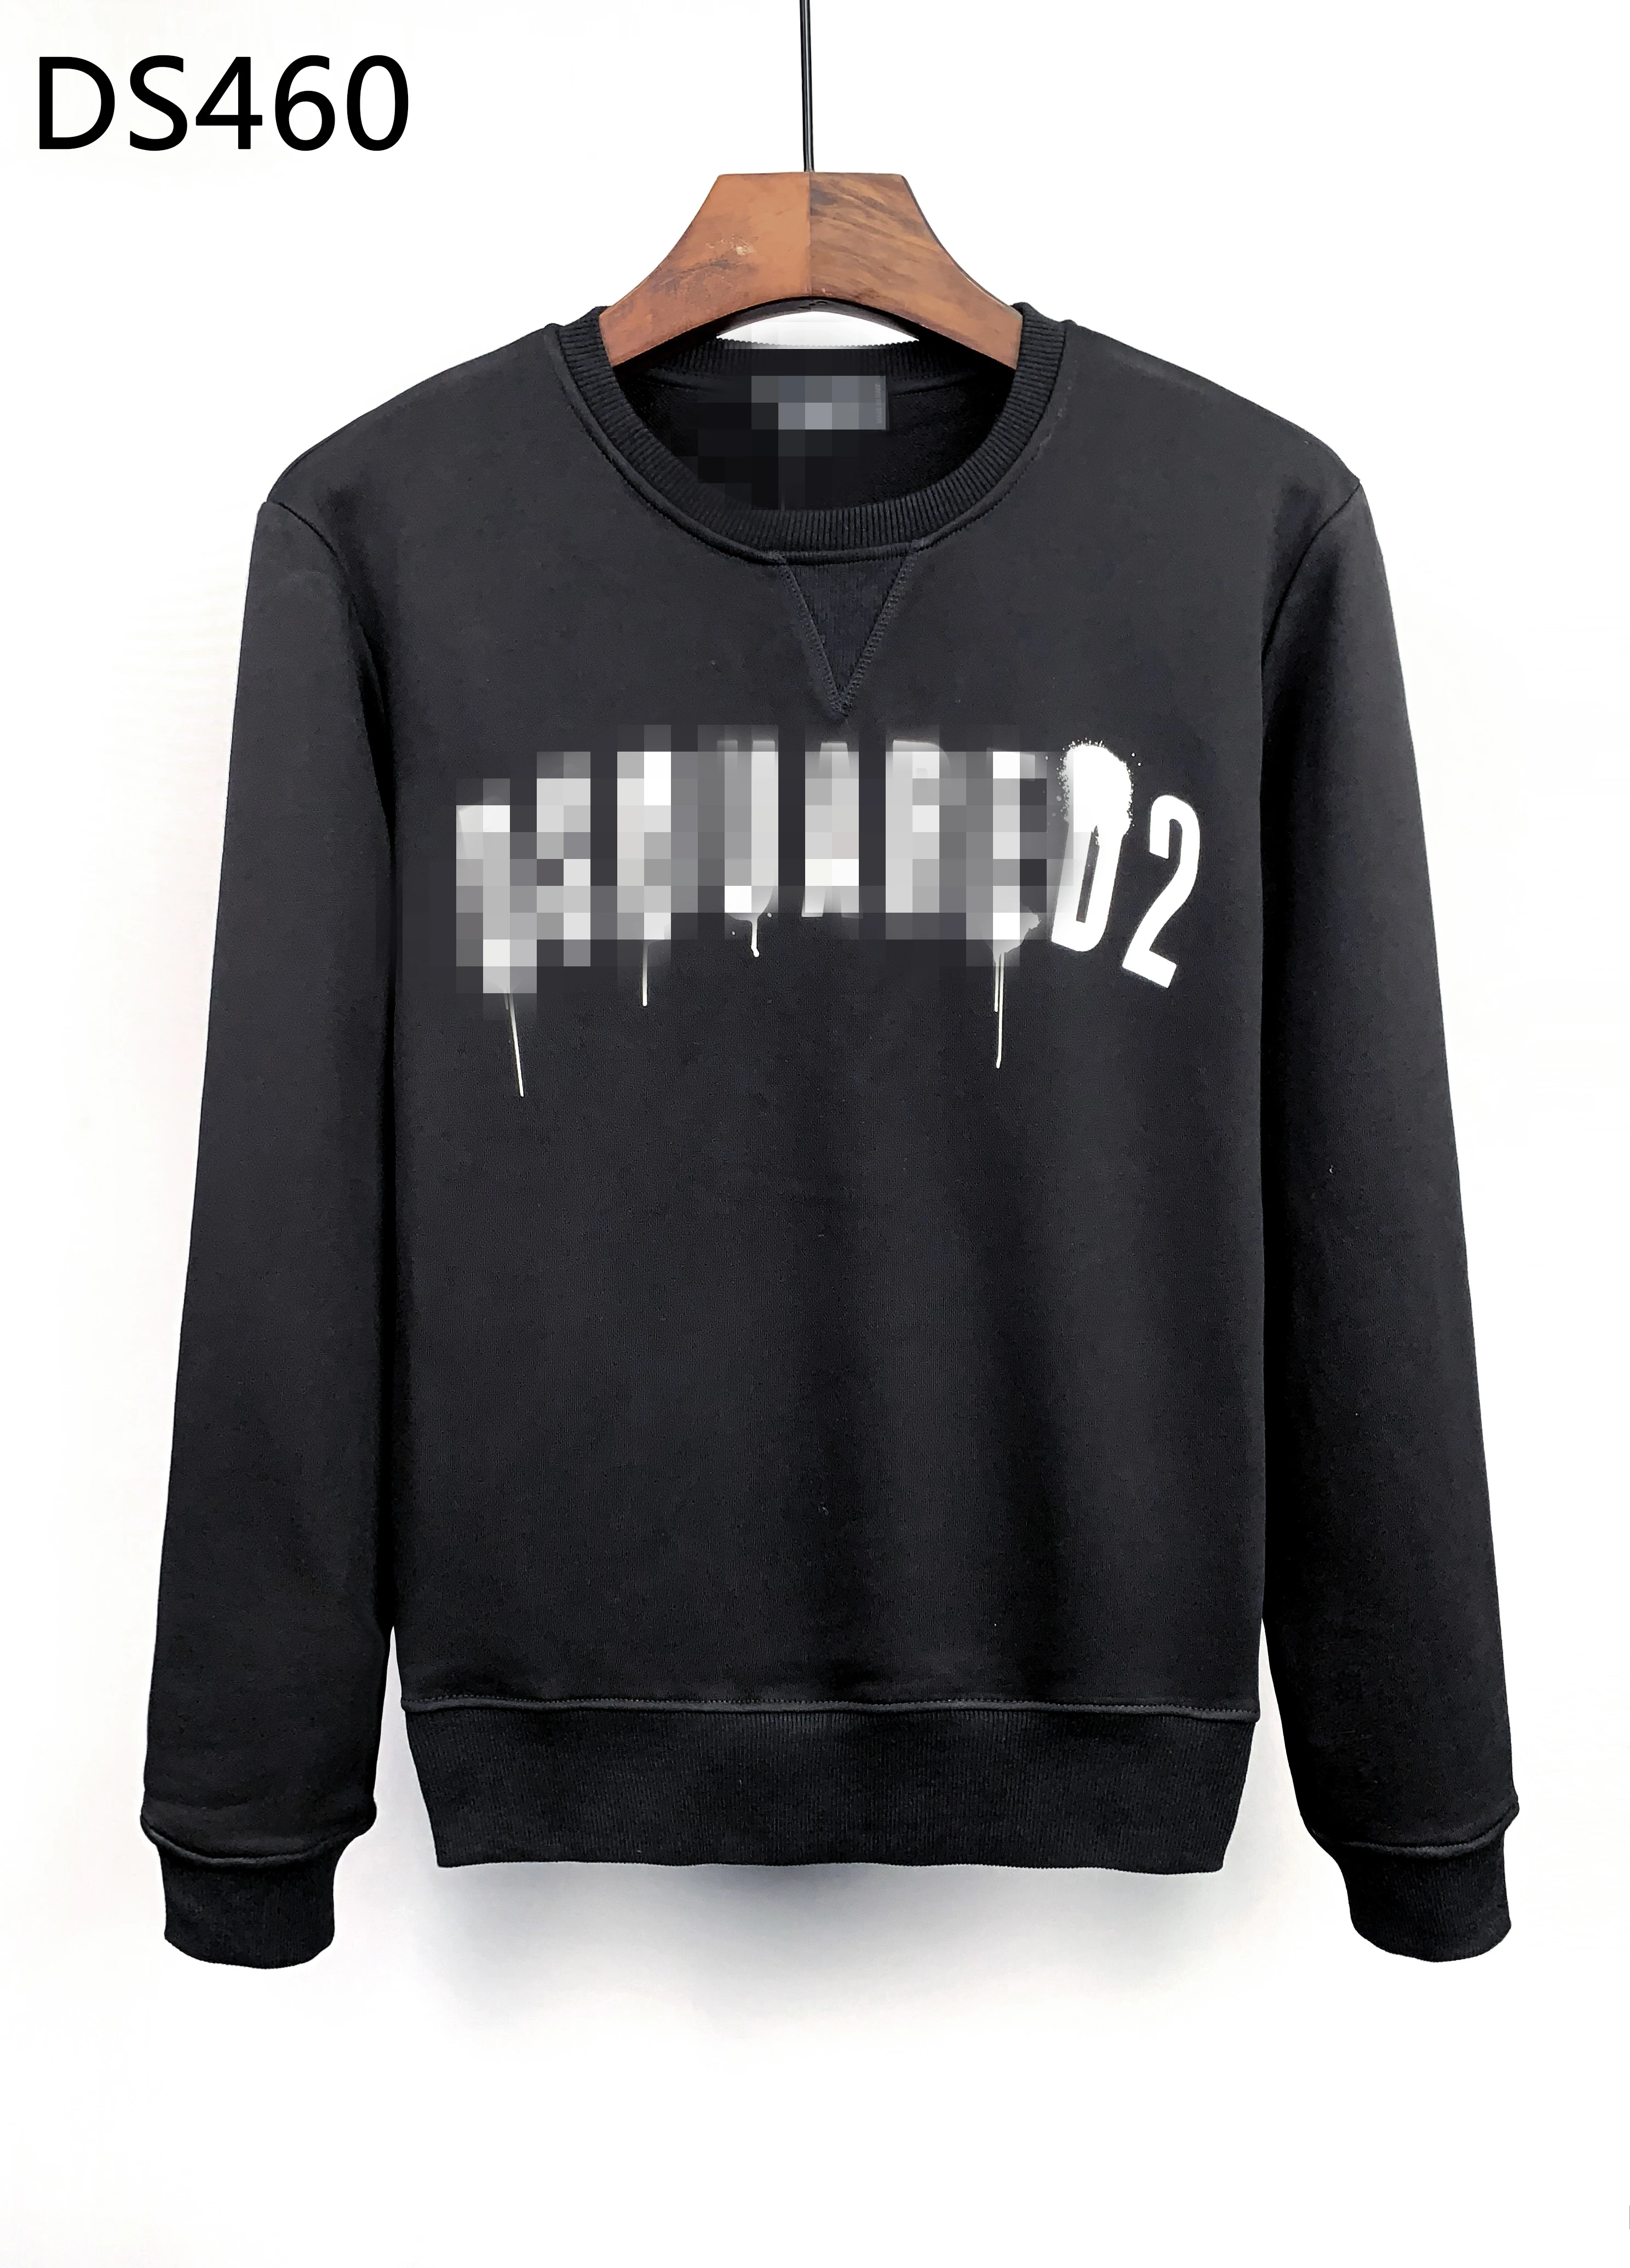 

D2 Sweater Pullover Men's D2 Mirror Print Trend Hooded Fashion Spring and Autumn Long Sleeve Top College Style New